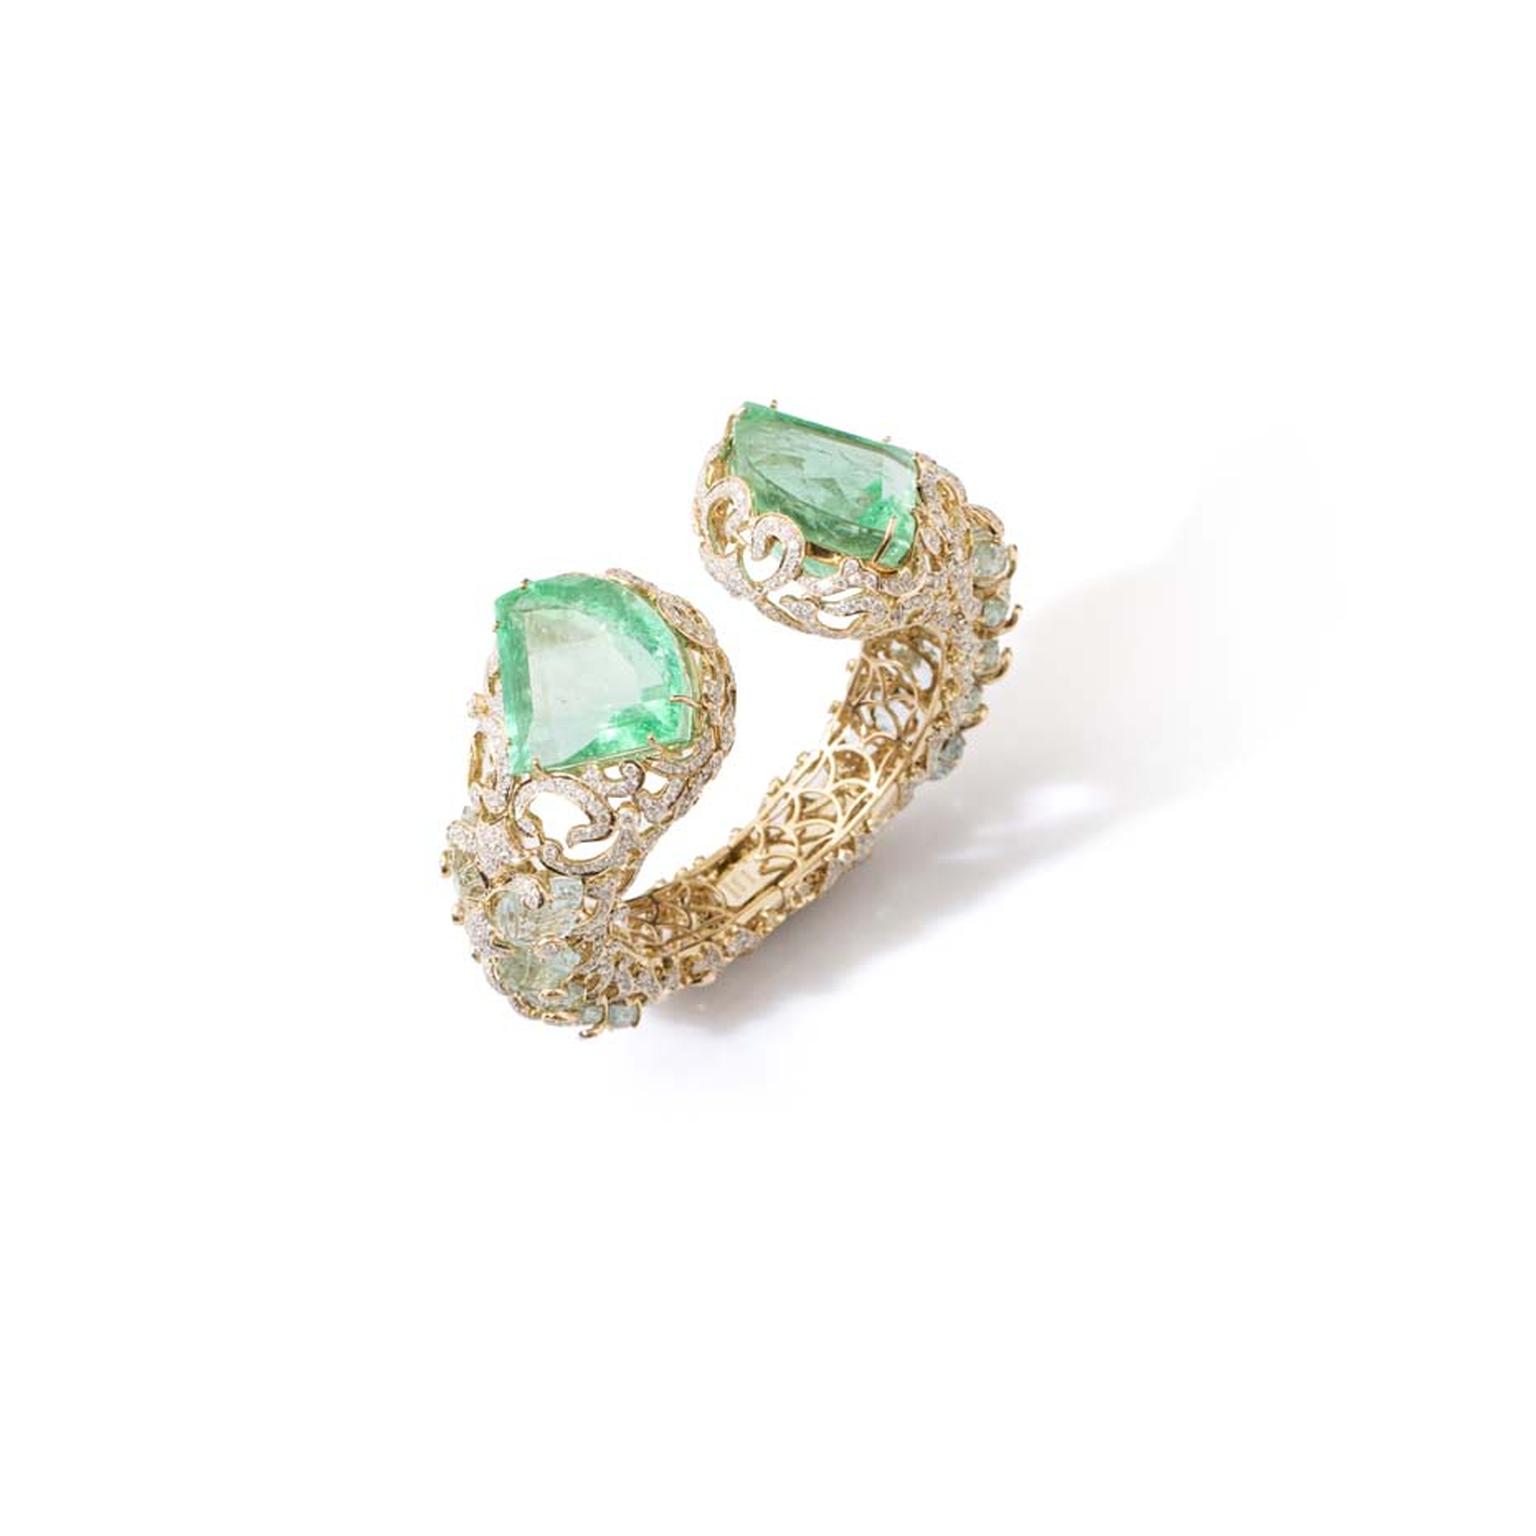 Fahra Khan_Le Jardin Exotique_An ornate kite-shaped Columbian emerald cuff weighing 151.24cts, set with carved aquamarine leaves in 18ct yellow gold and diamonds.jpg